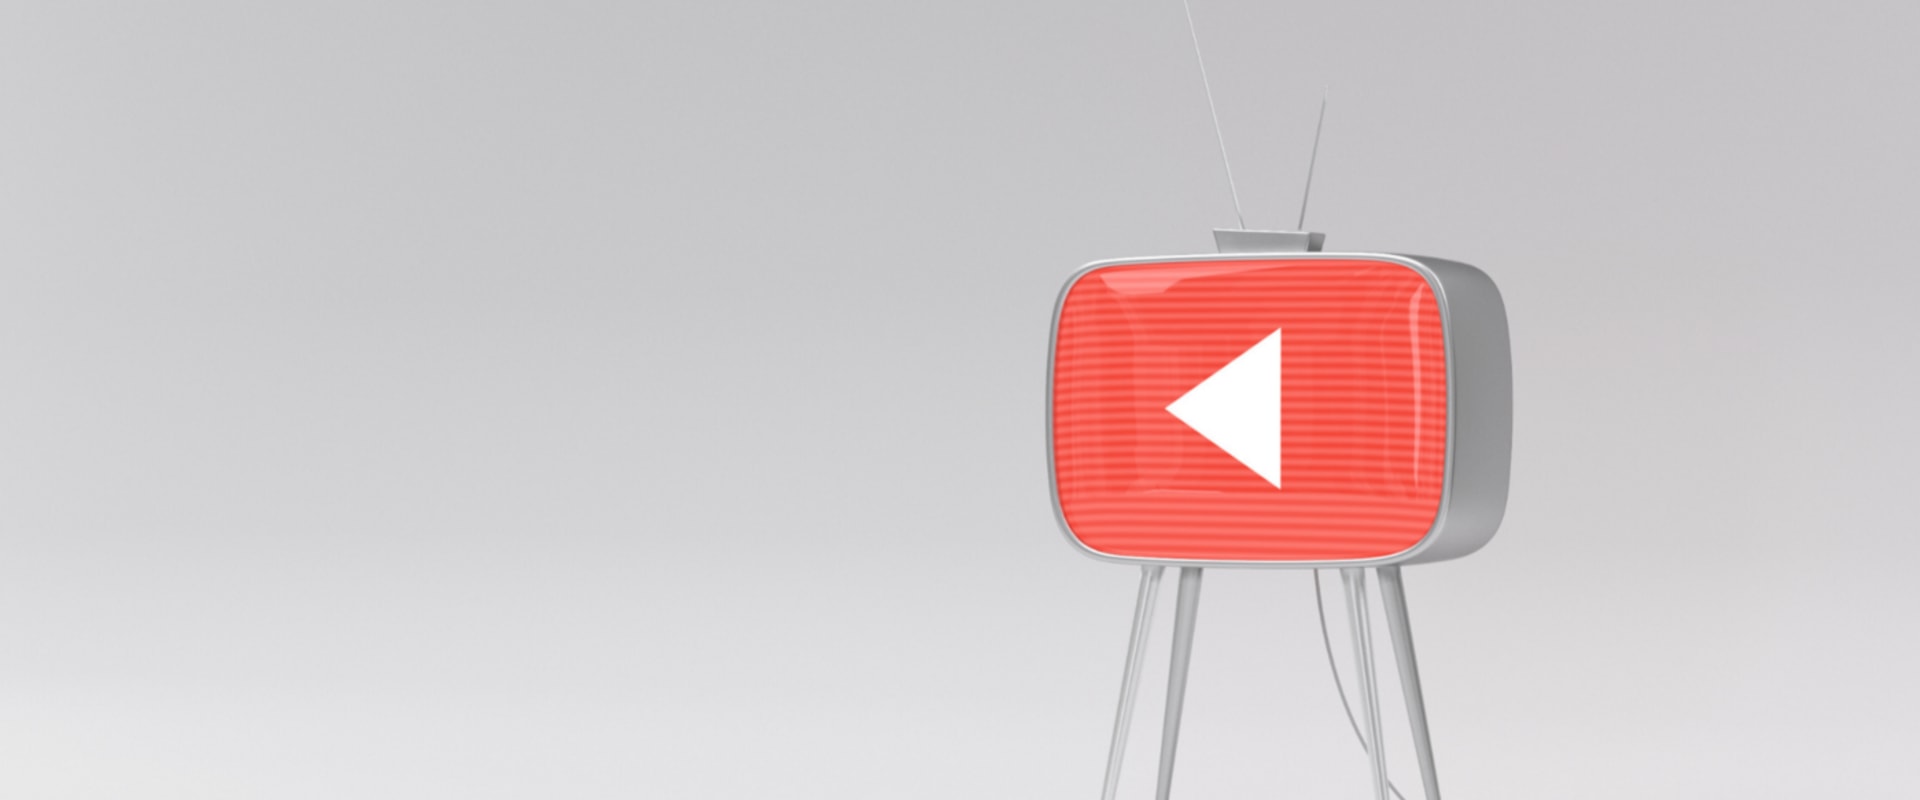 How is youtube used in digital marketing?